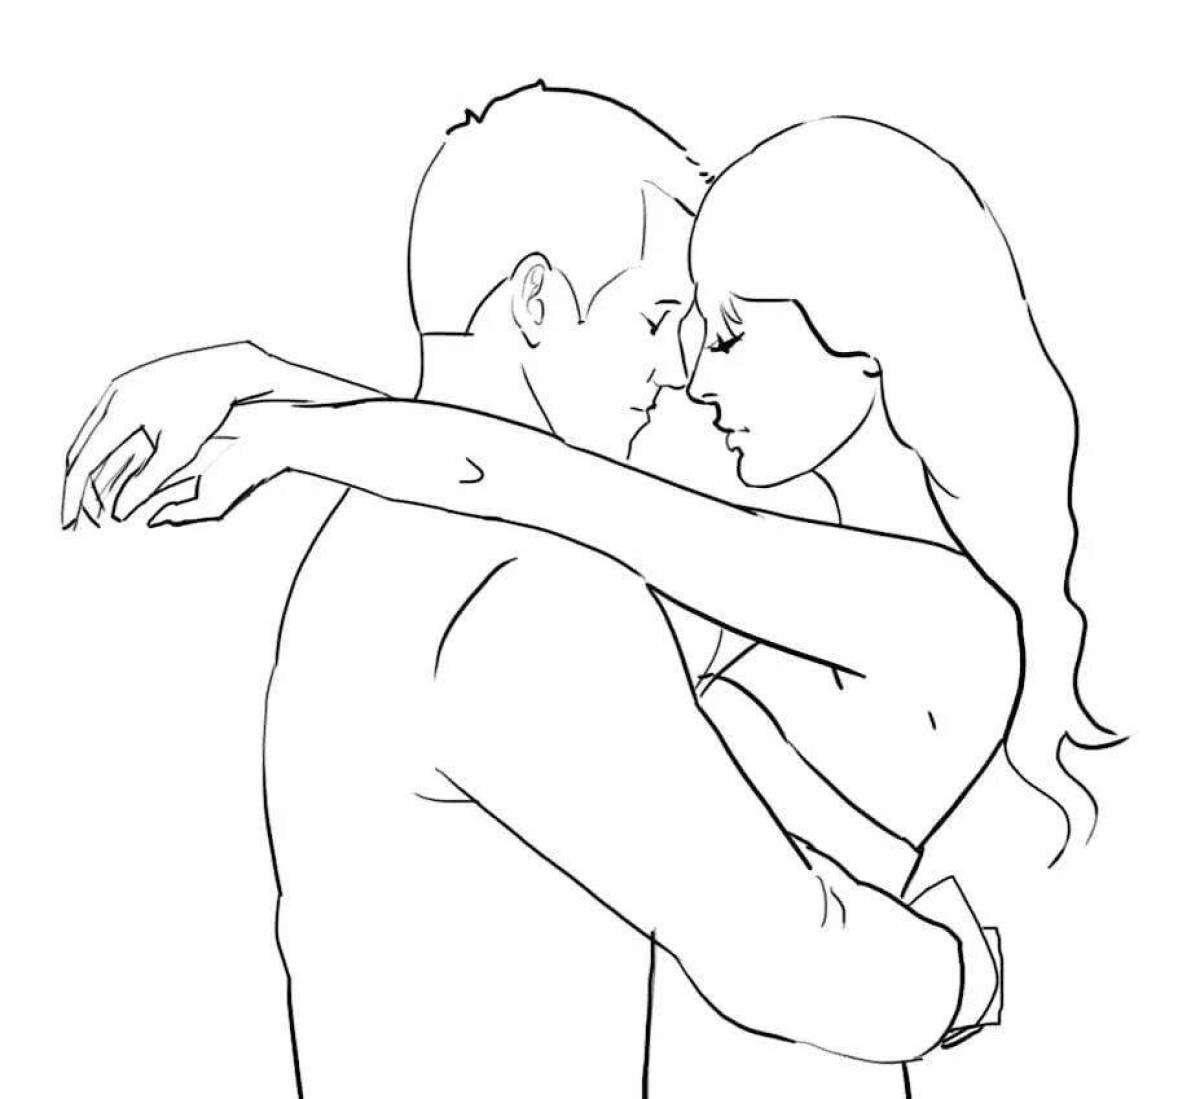 Cute woman and man coloring book